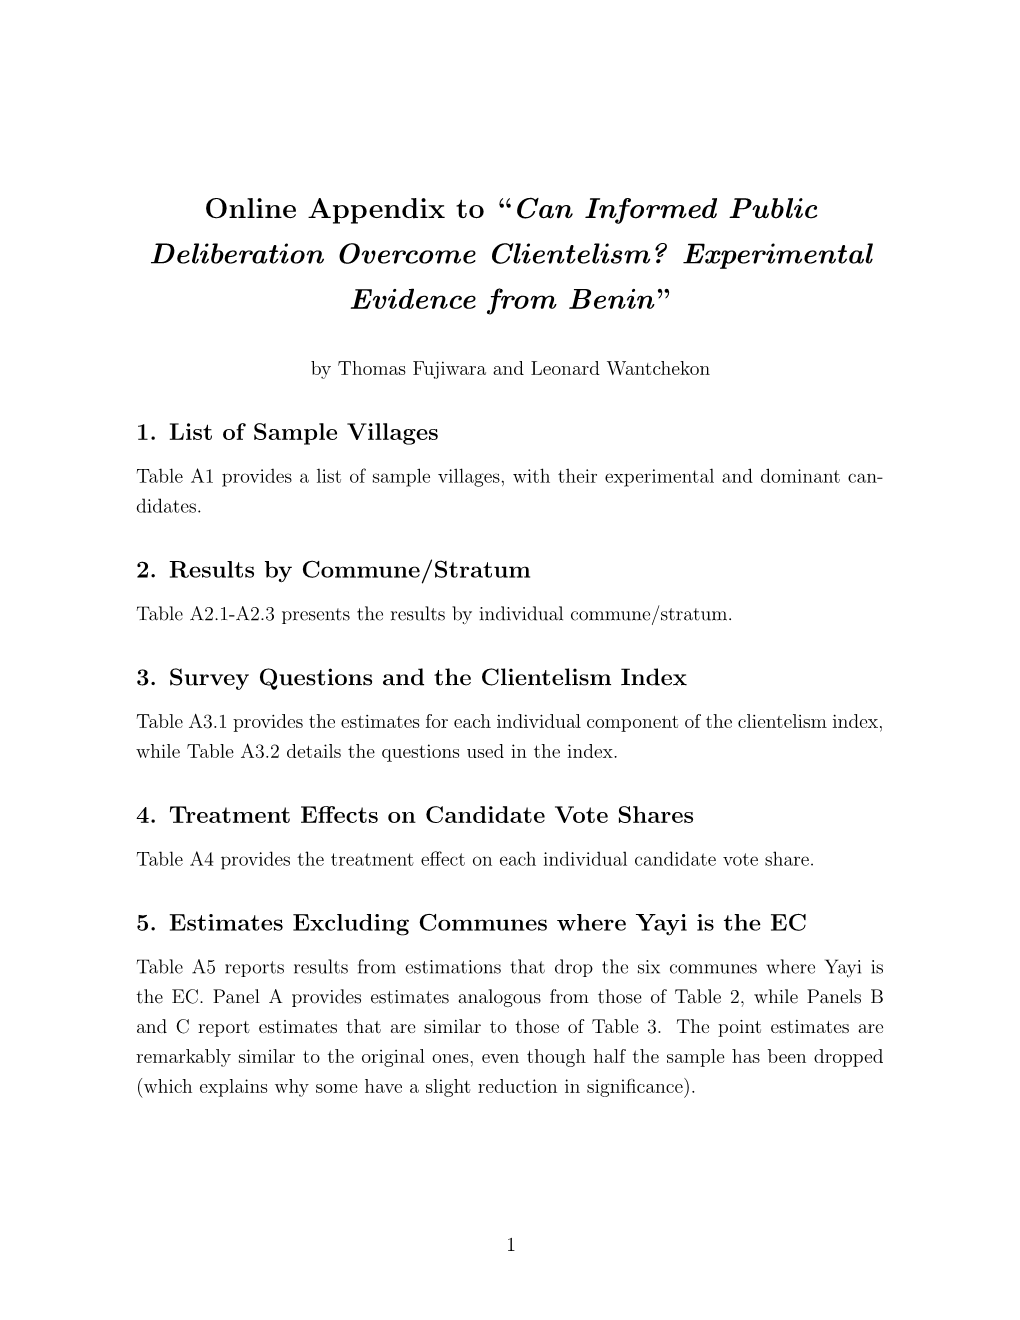 Online Appendix to “Can Informed Public Deliberation Overcome Clientelism? Experimental Evidence from Benin”